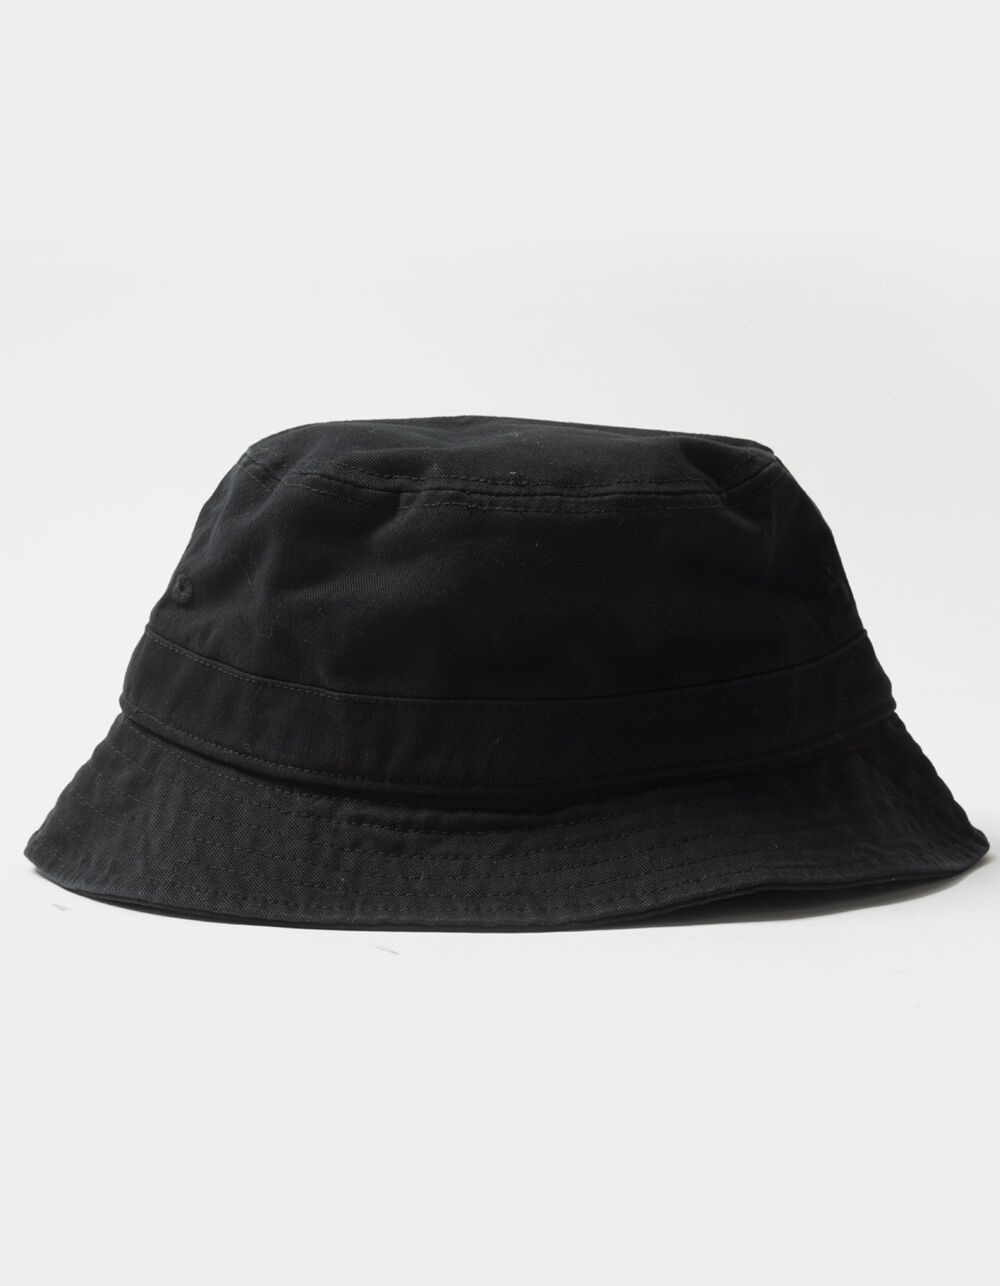 CHAMPION Garment Washed Relaxed Bucket Hat - BLACK | Tillys